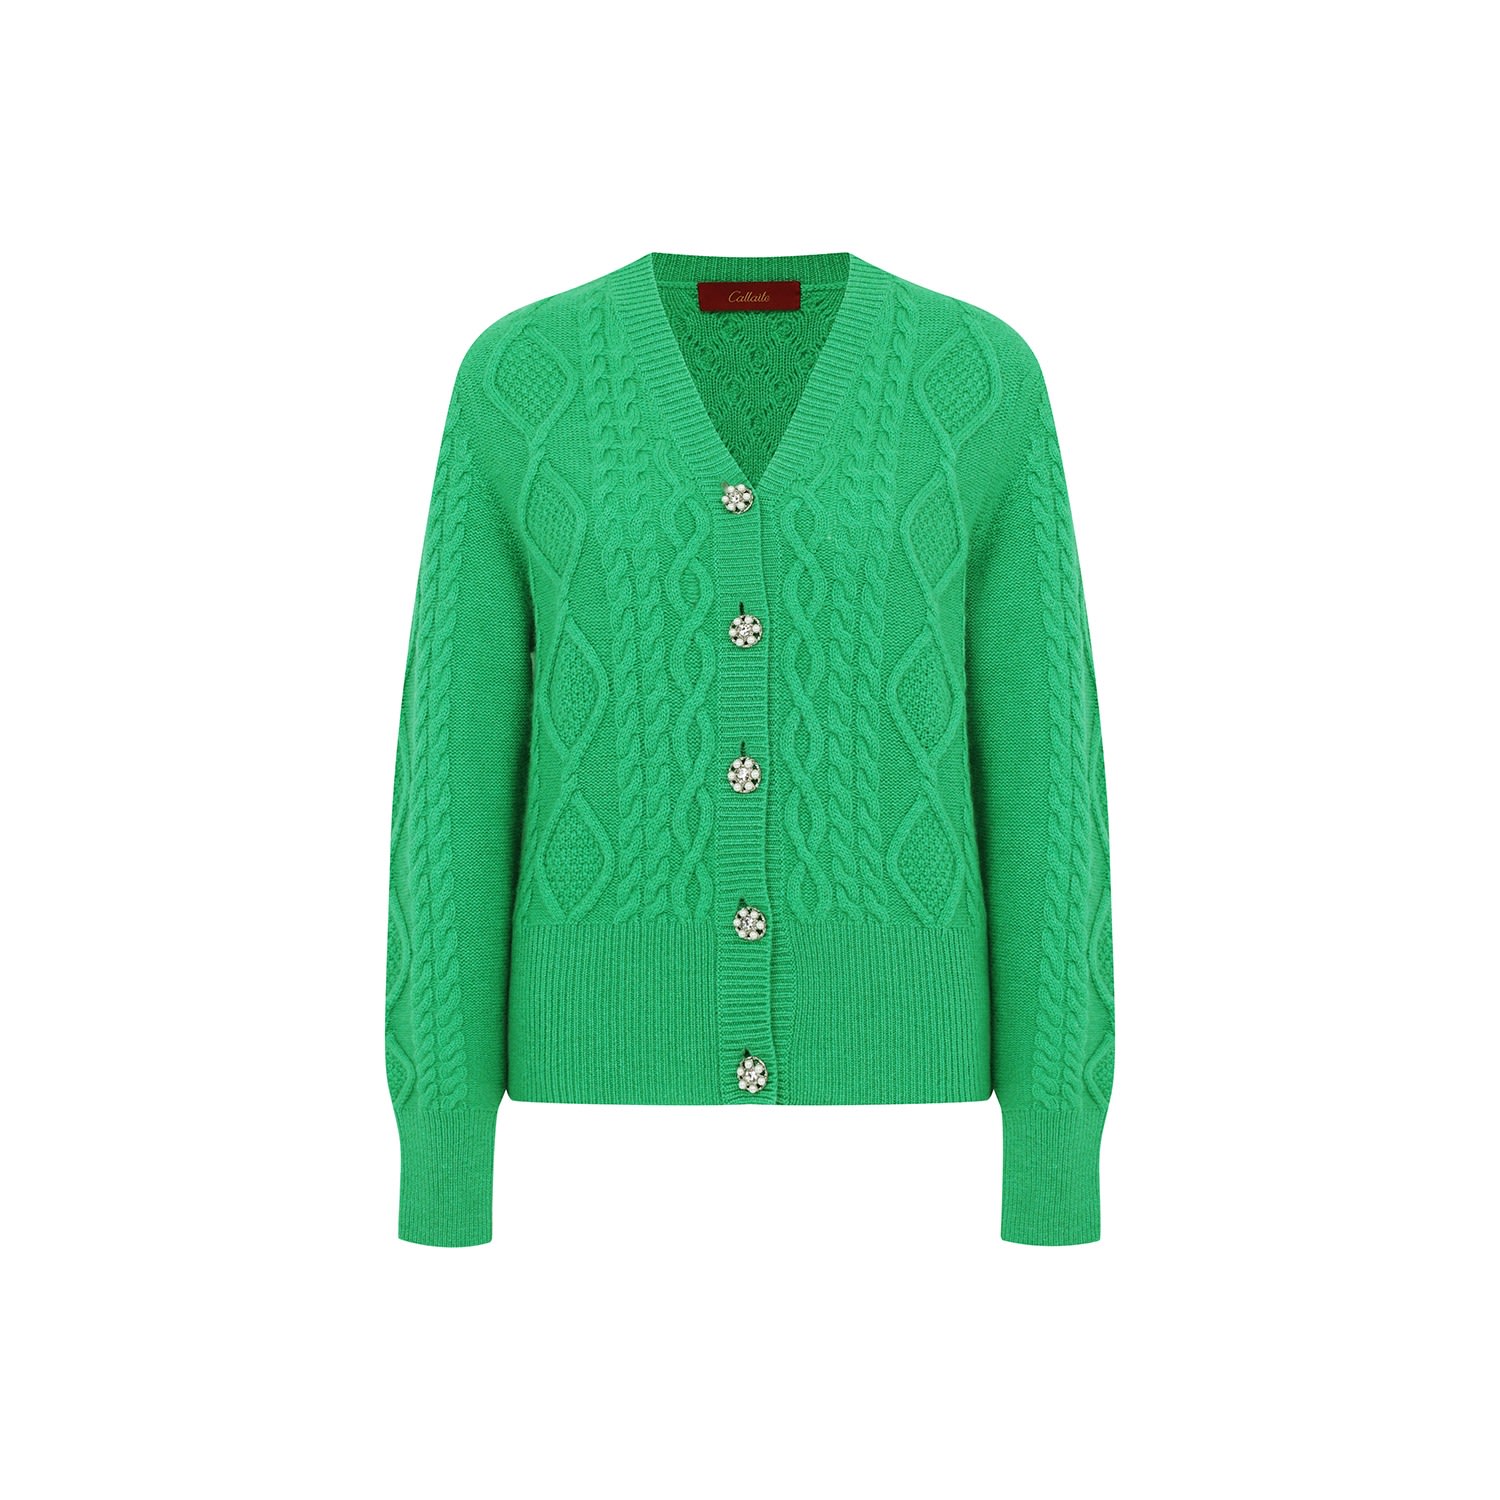 Women’s Cable-Knit Cashmere Cardigan, Green Small Callaite